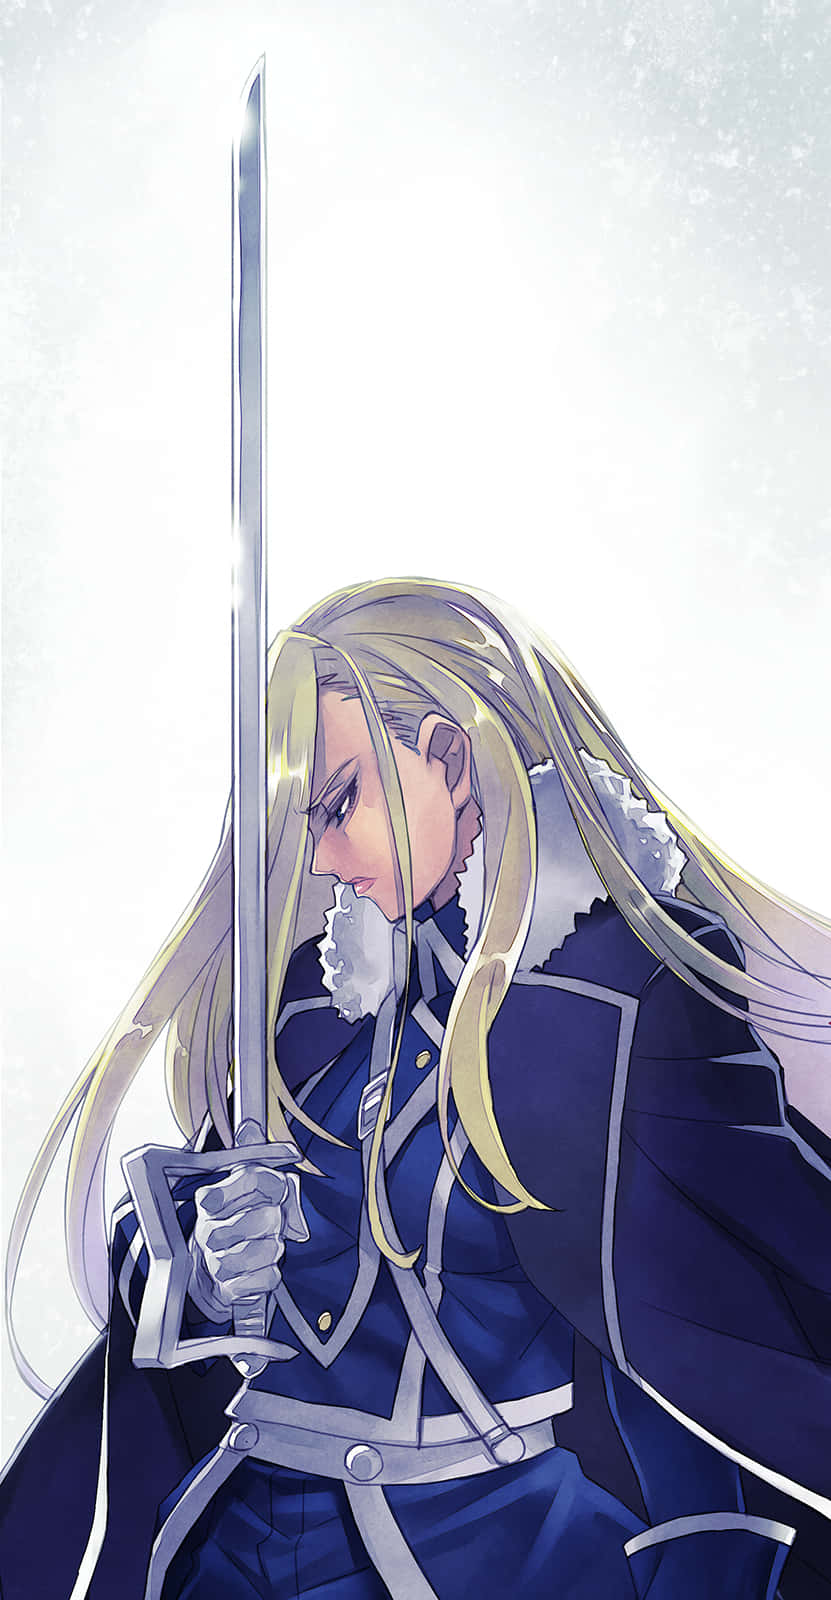 Olivier Mira Armstrong in a snowy landscape. Wallpaper